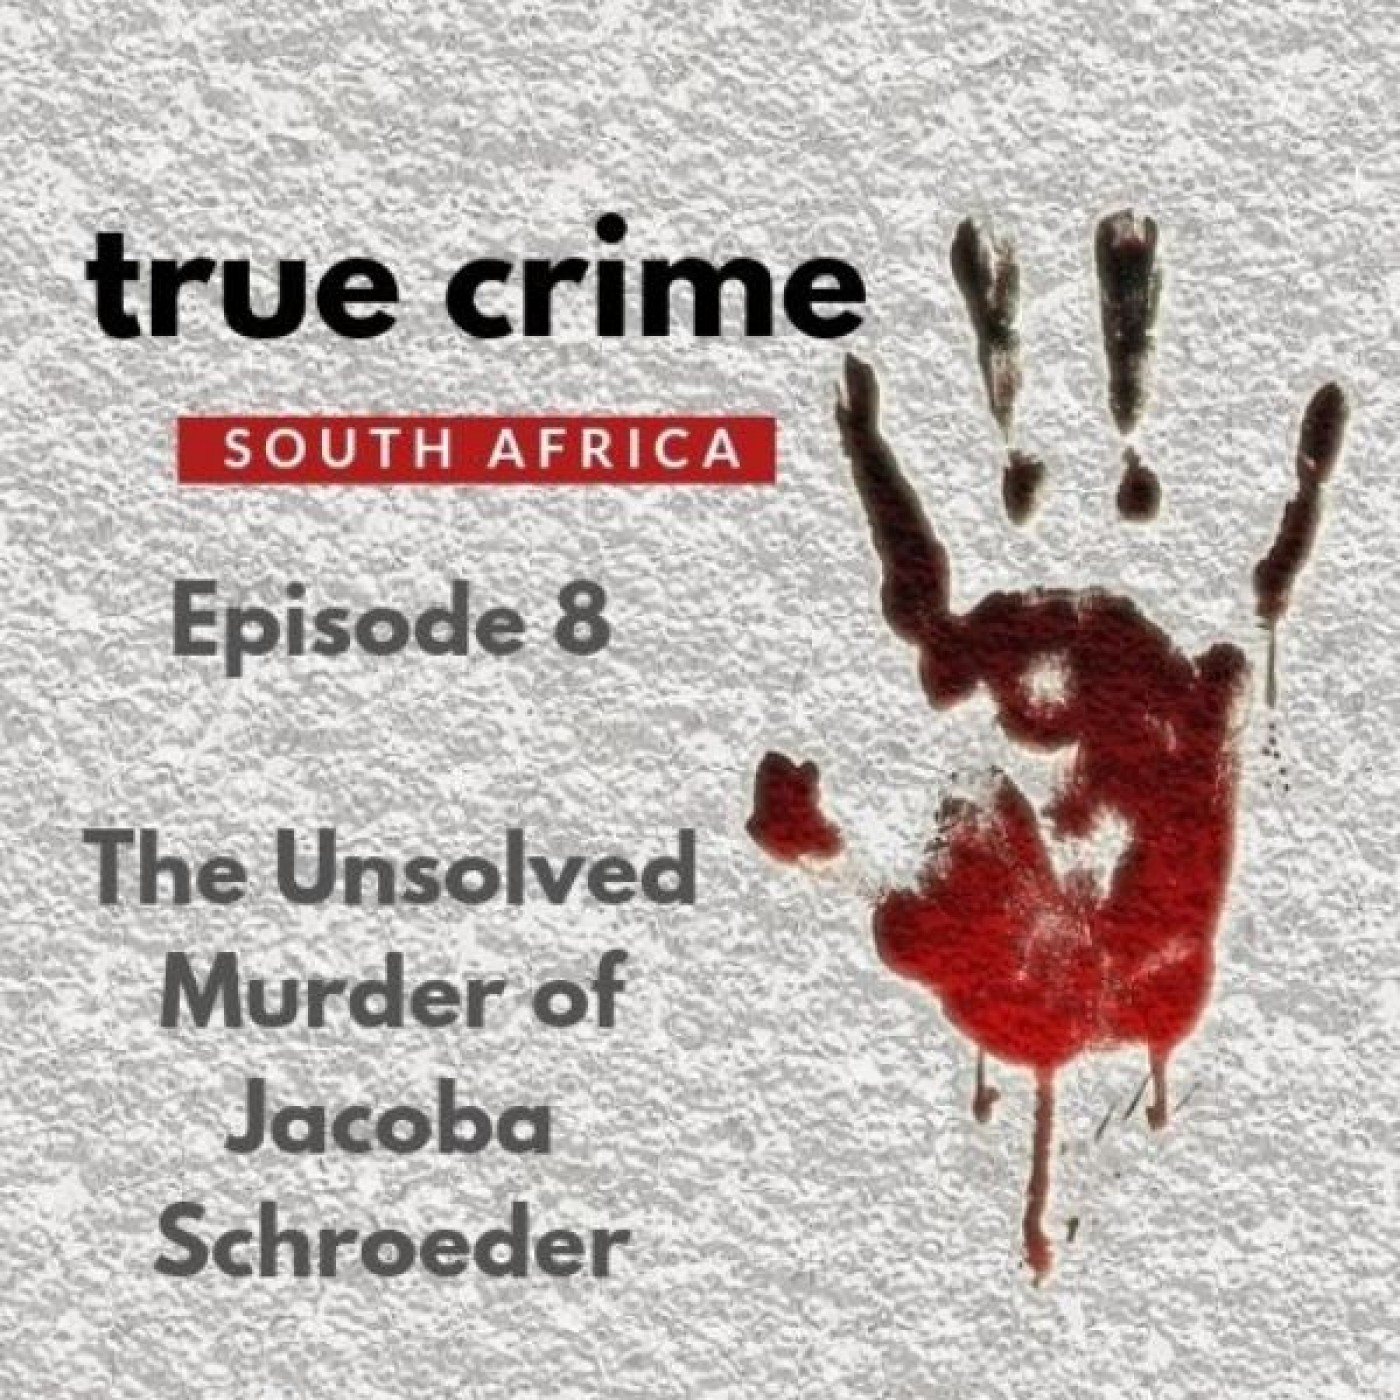 Episode 8: The Unsolved Murder of Jacoba Schroeder